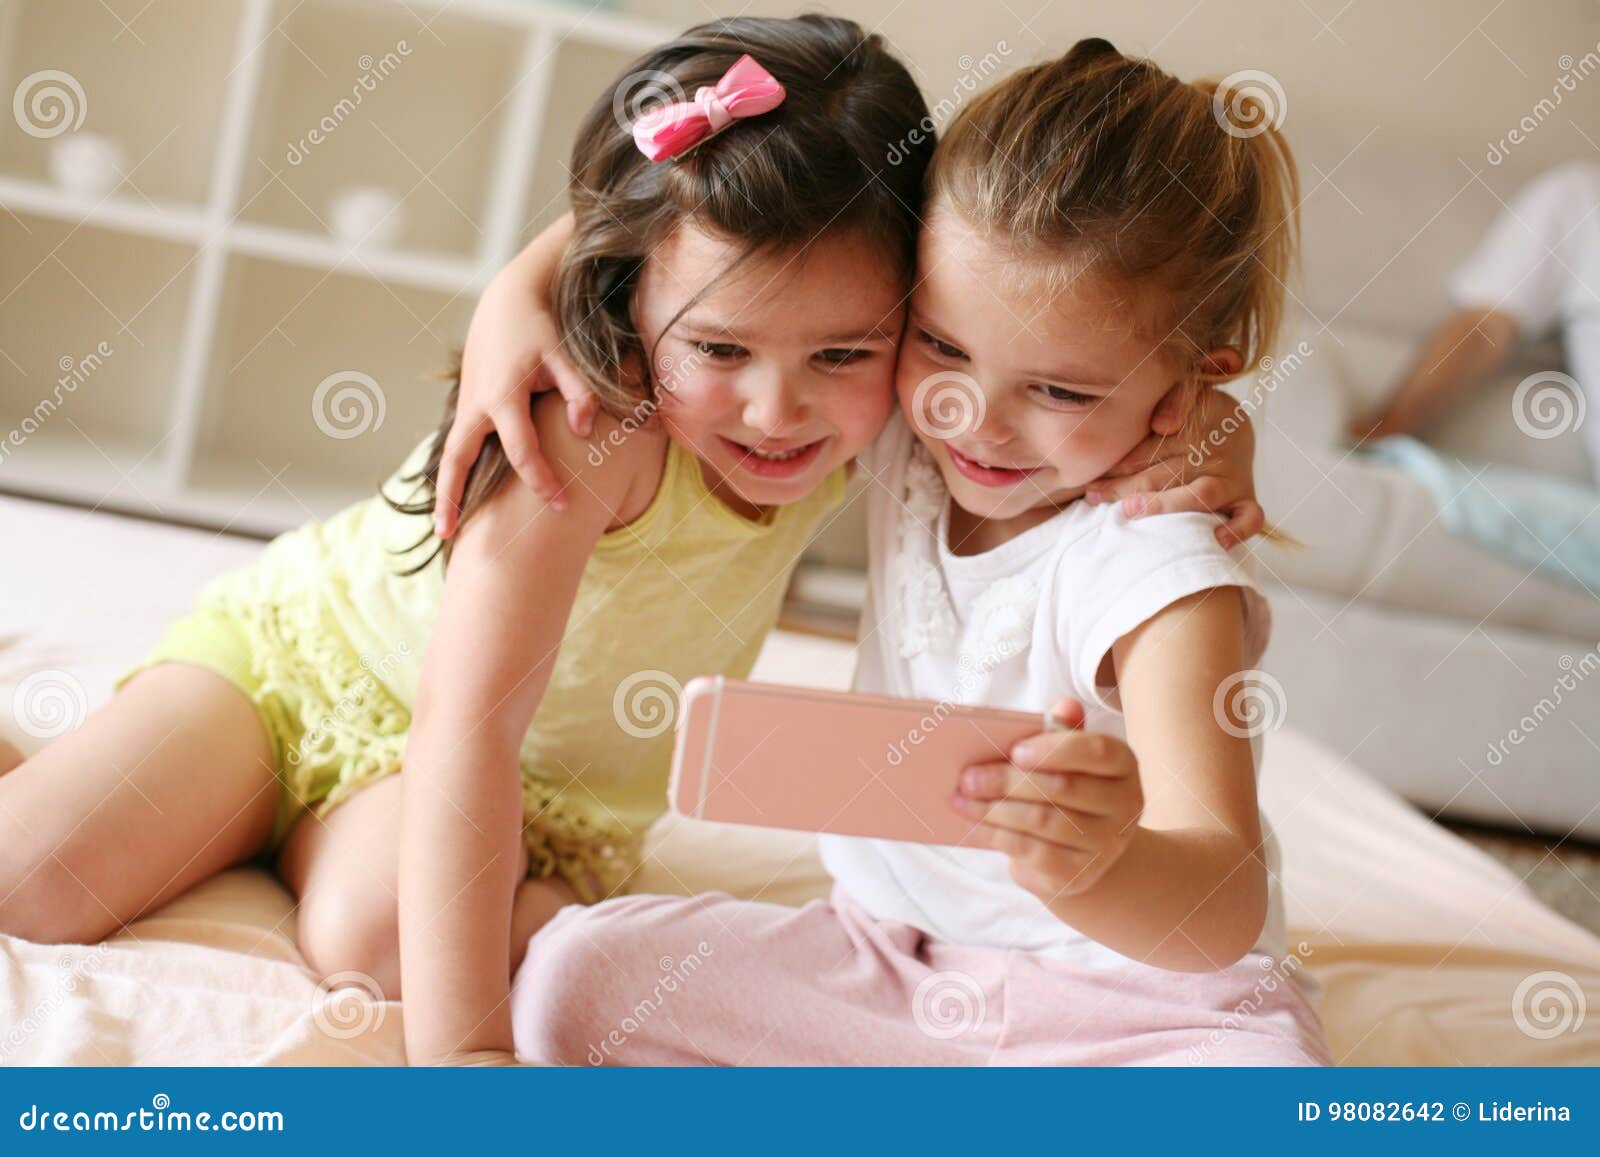 Two little girls at home. stock photo. Image of friendship - 98082642